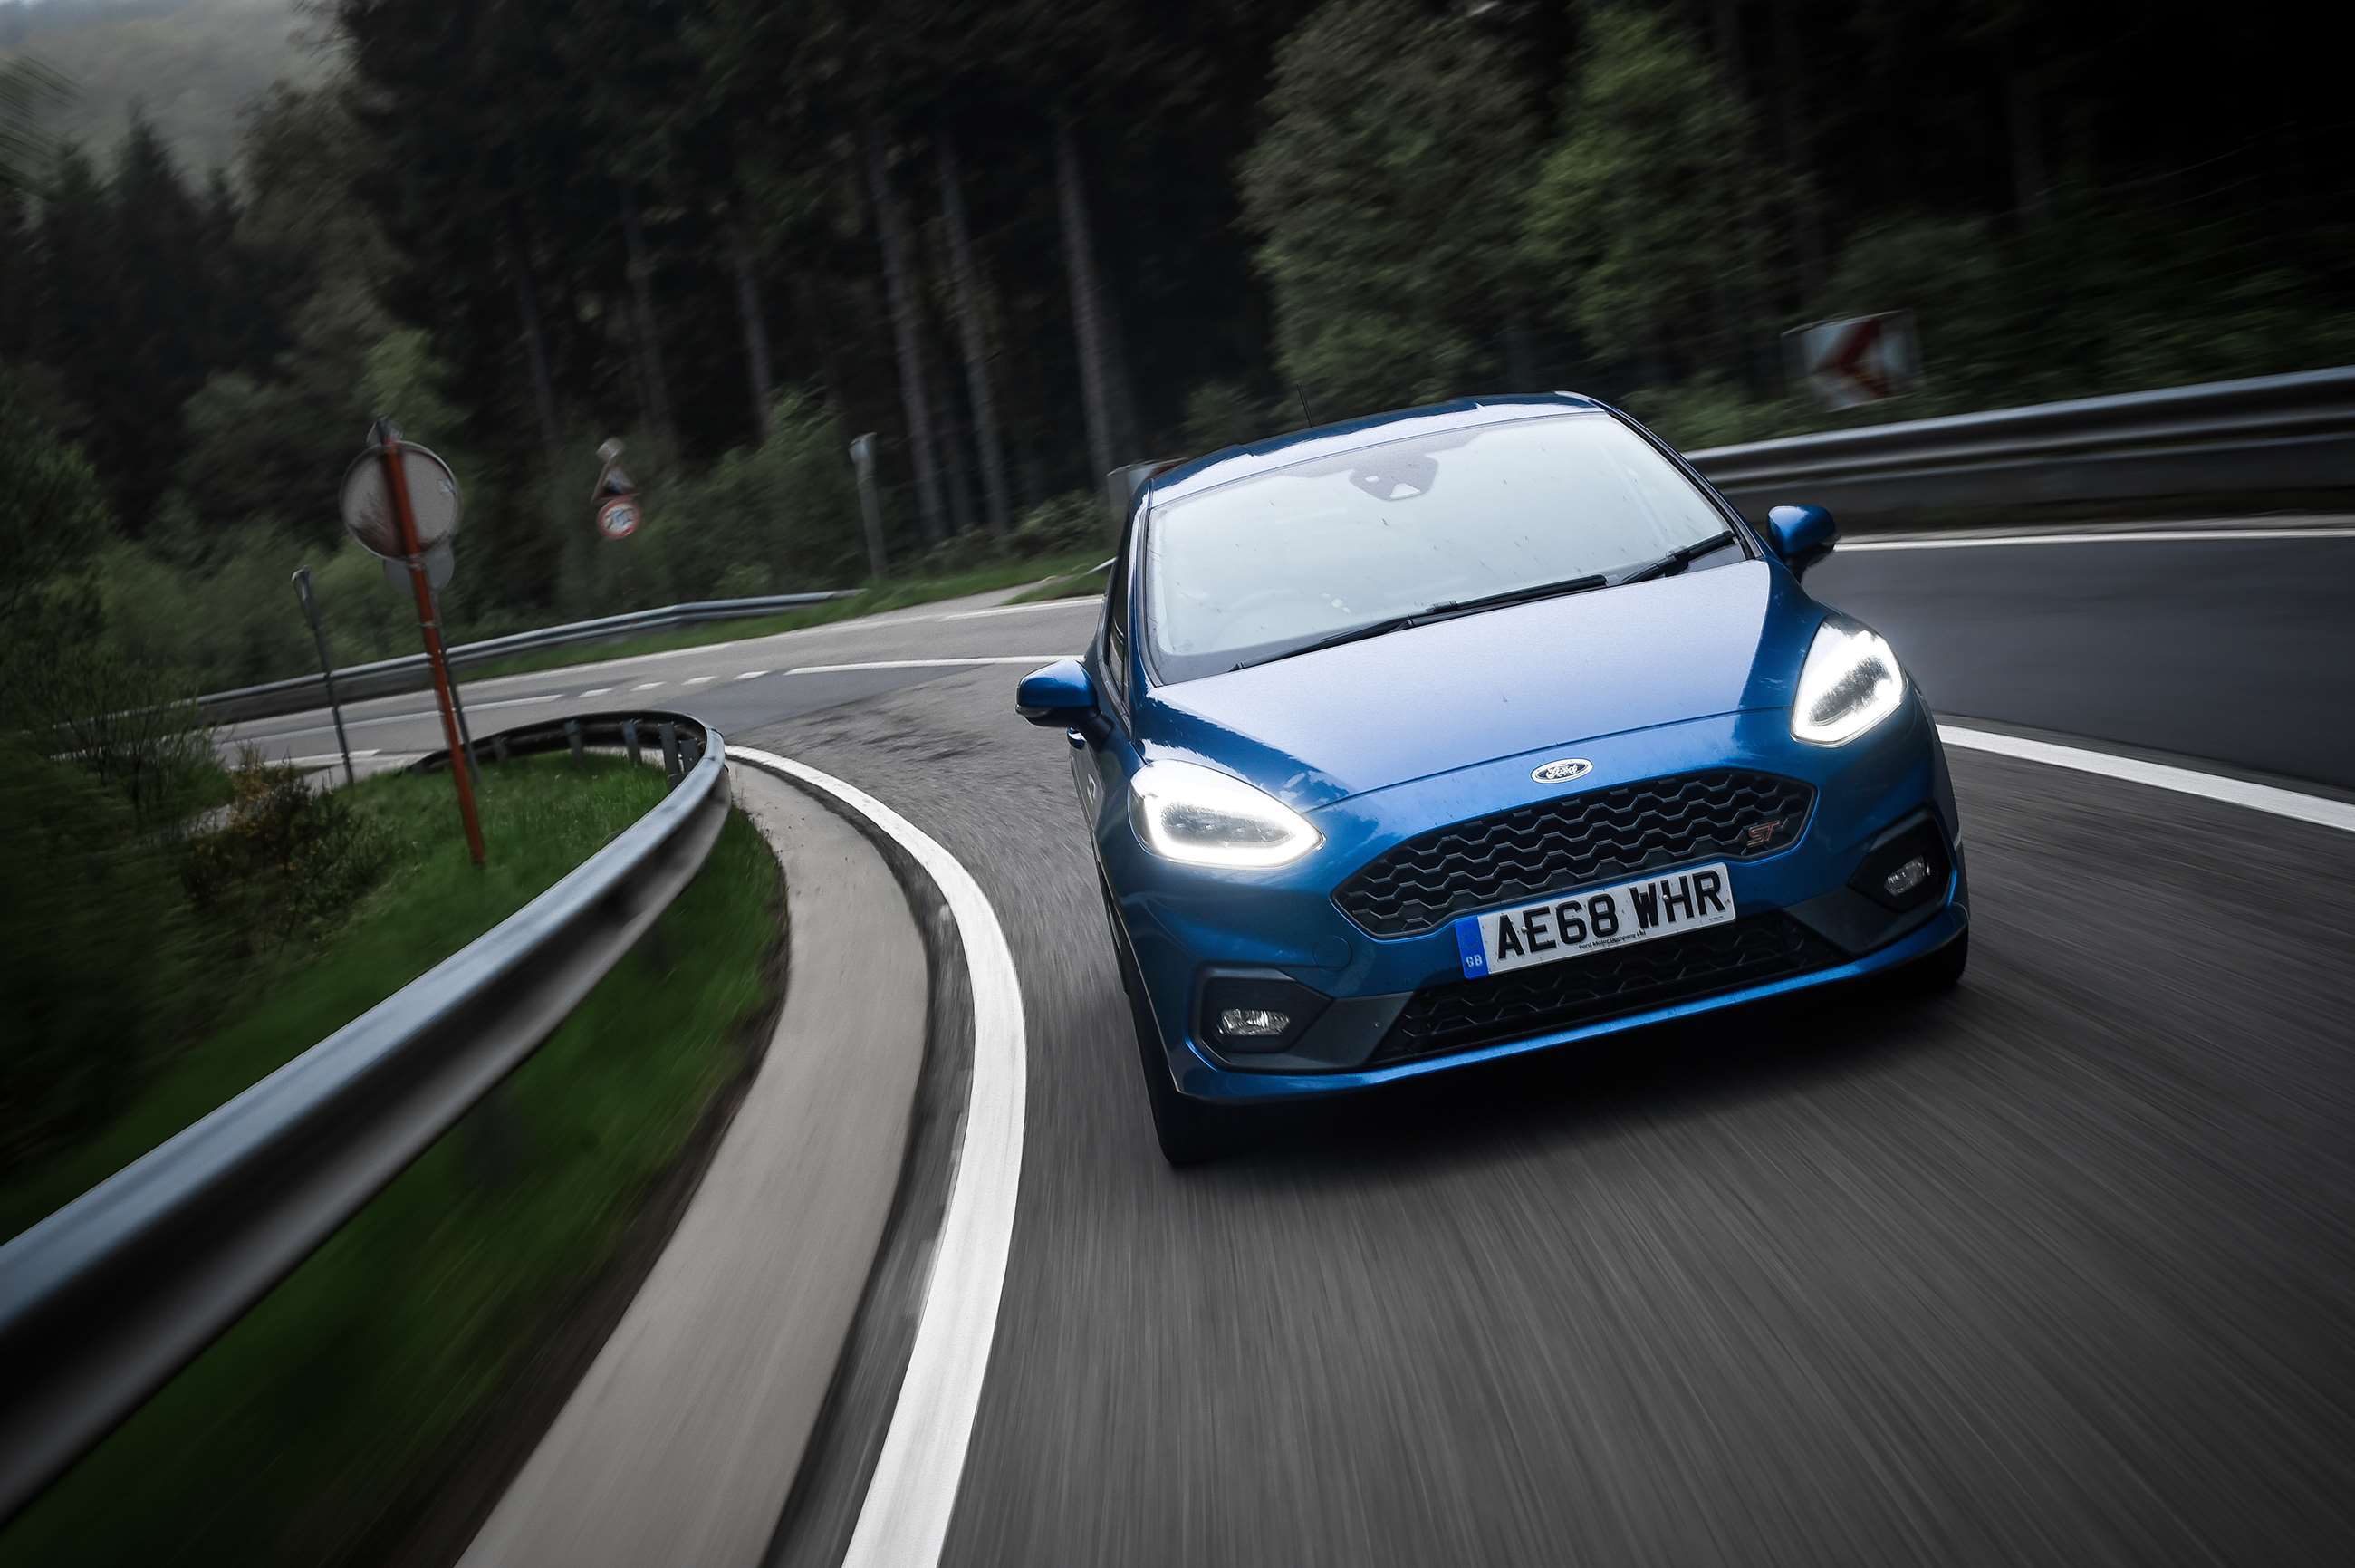 ford-fiesta-st-spa-francorchamps-ardennes-forest-pete-summers-goodwood-06062019.jpg